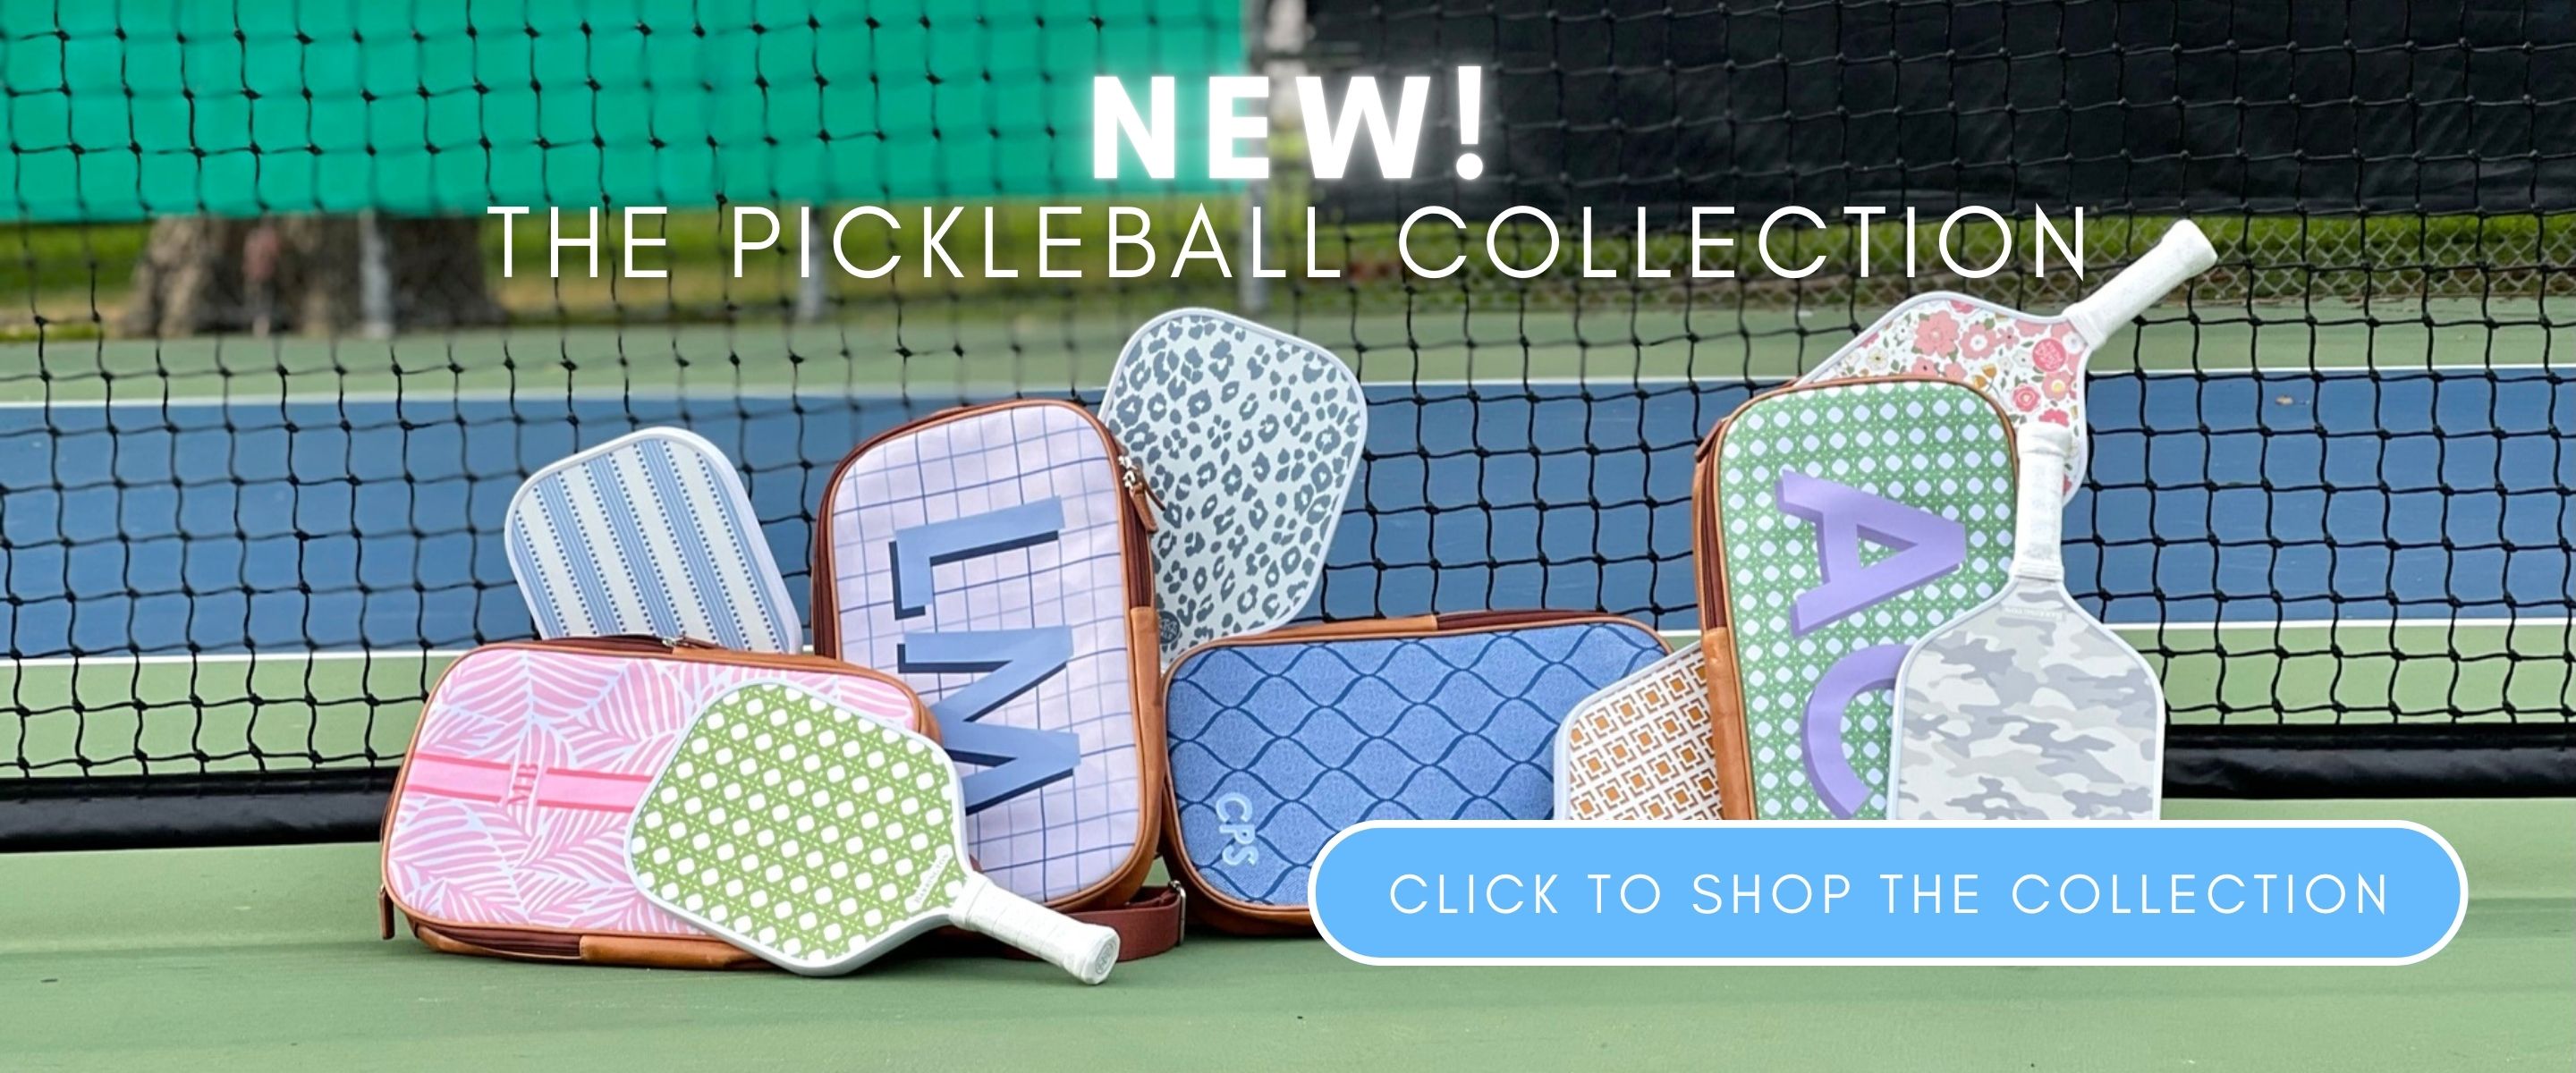 Personalized Gifts - Pickleball Collection